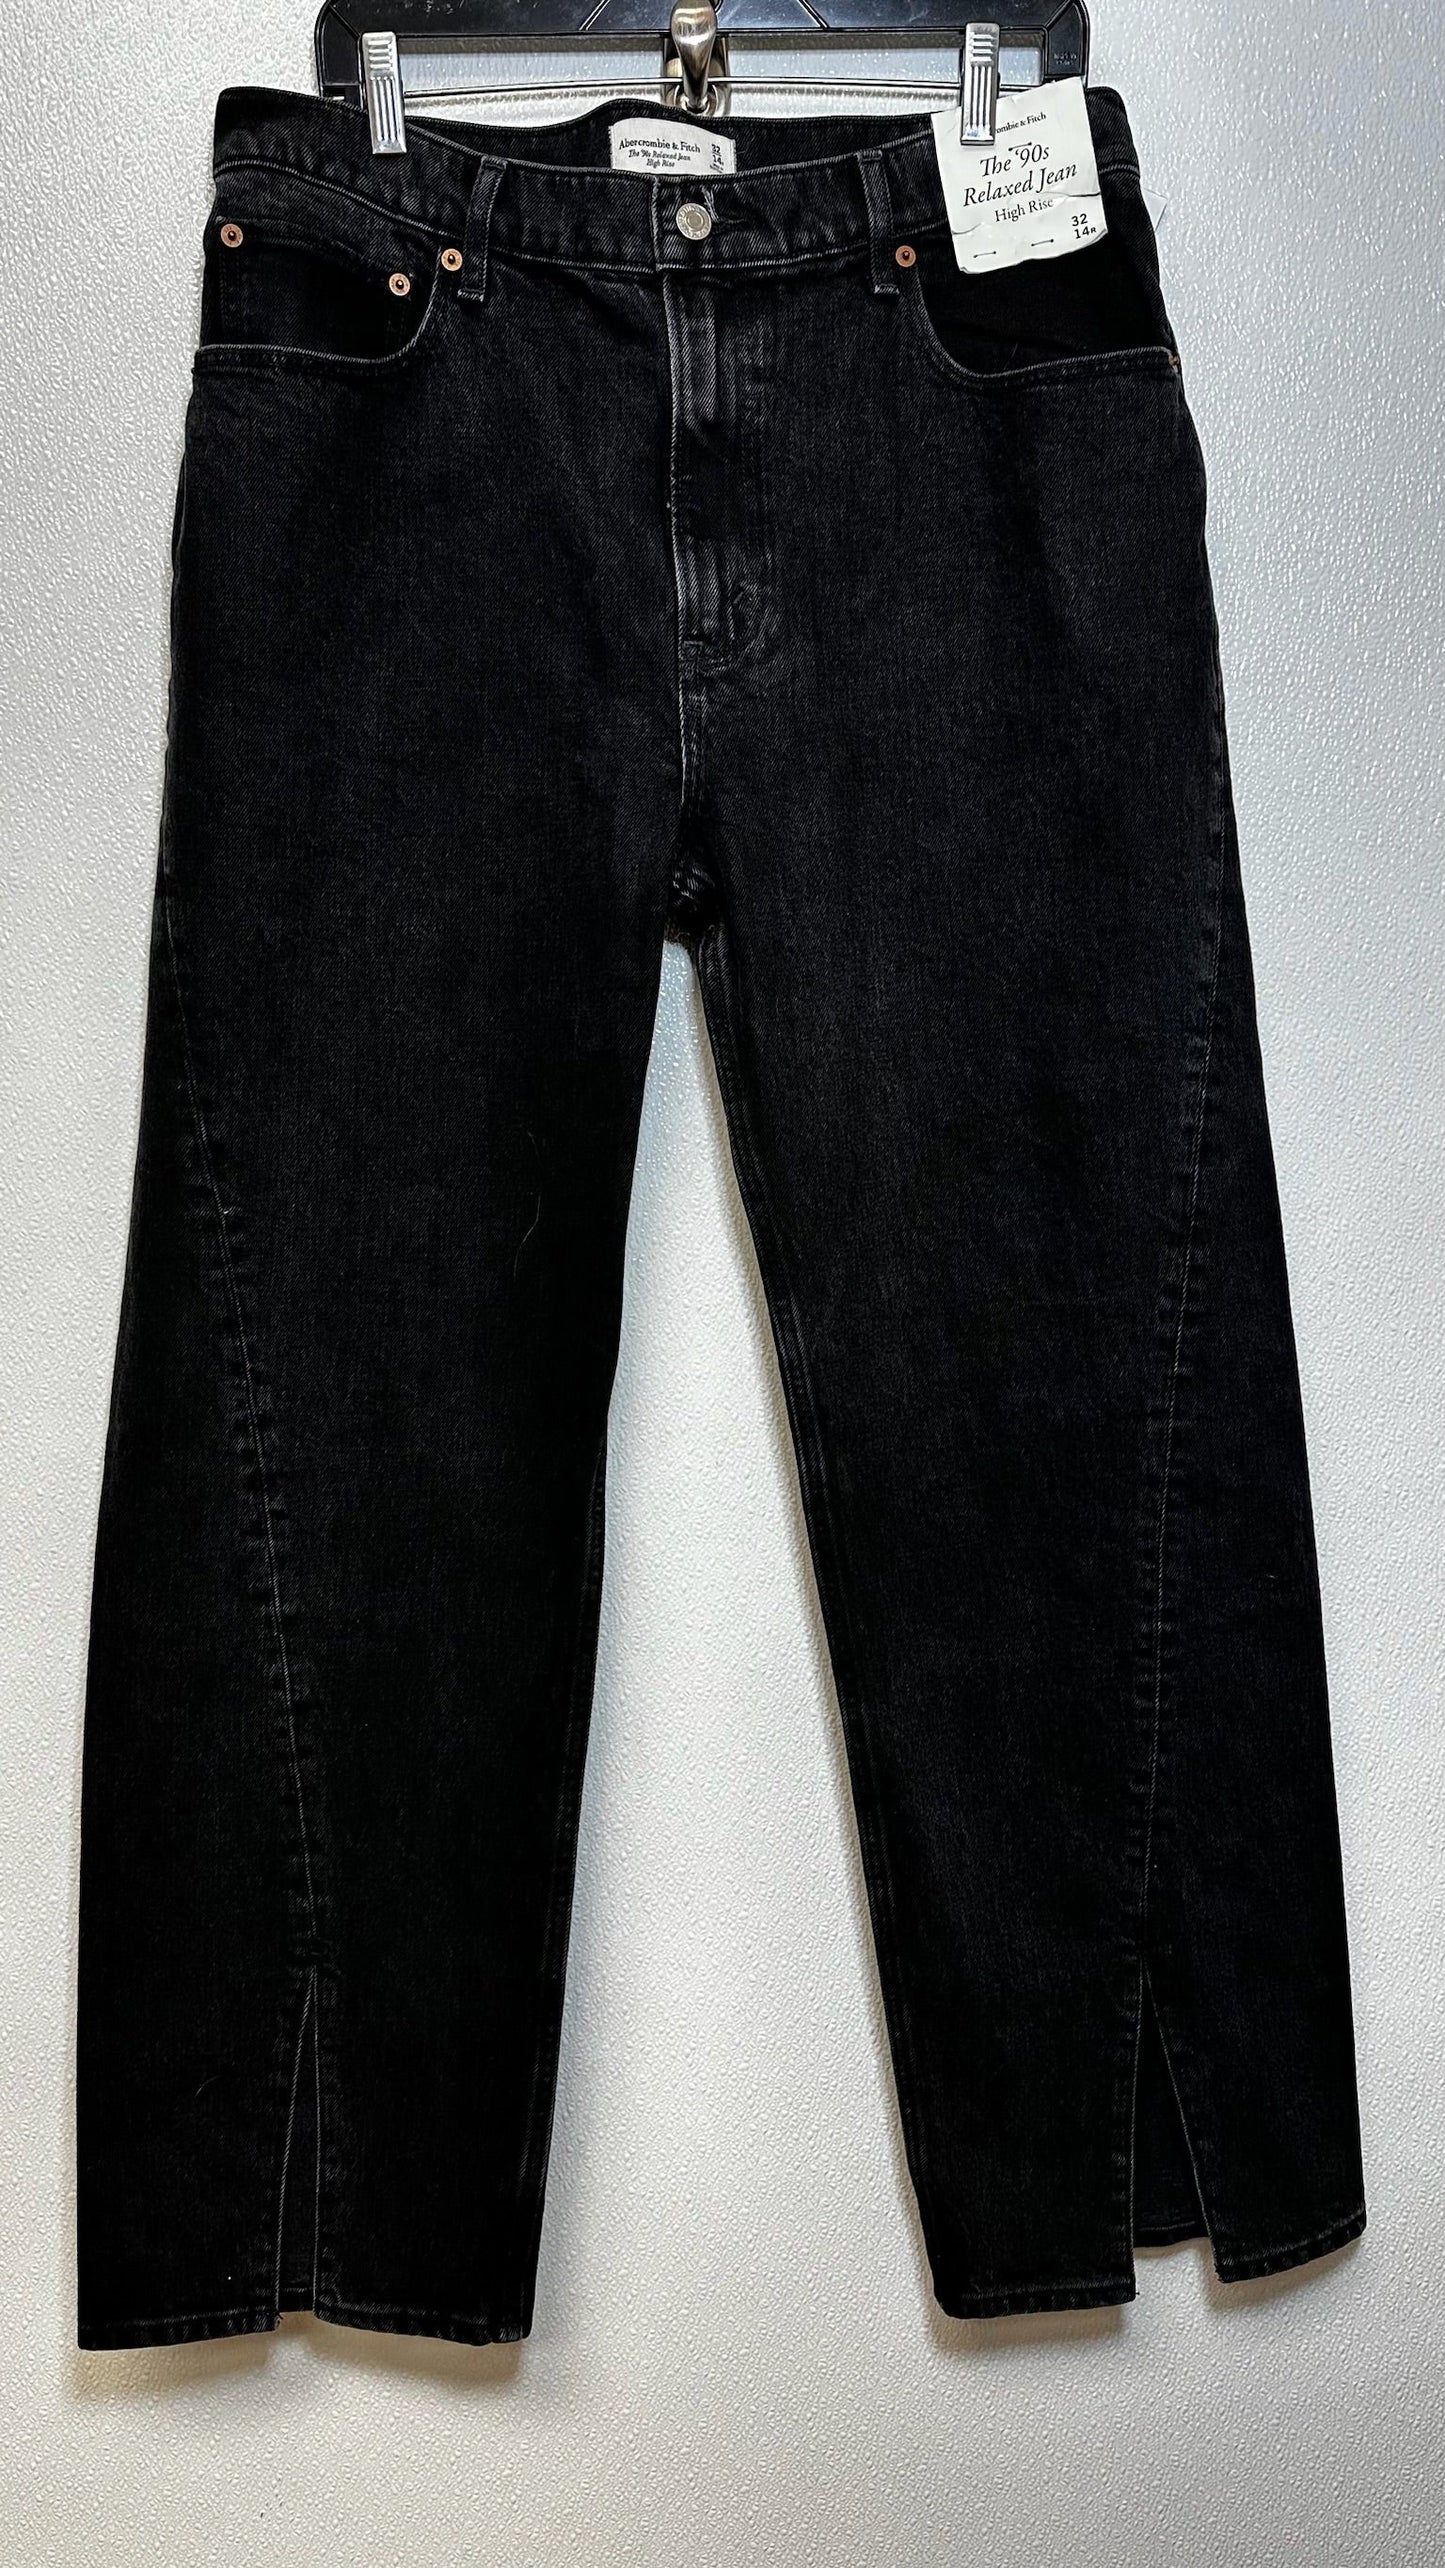 Black Jeans Relaxed/boyfriend Abercrombie And Fitch, Size 14